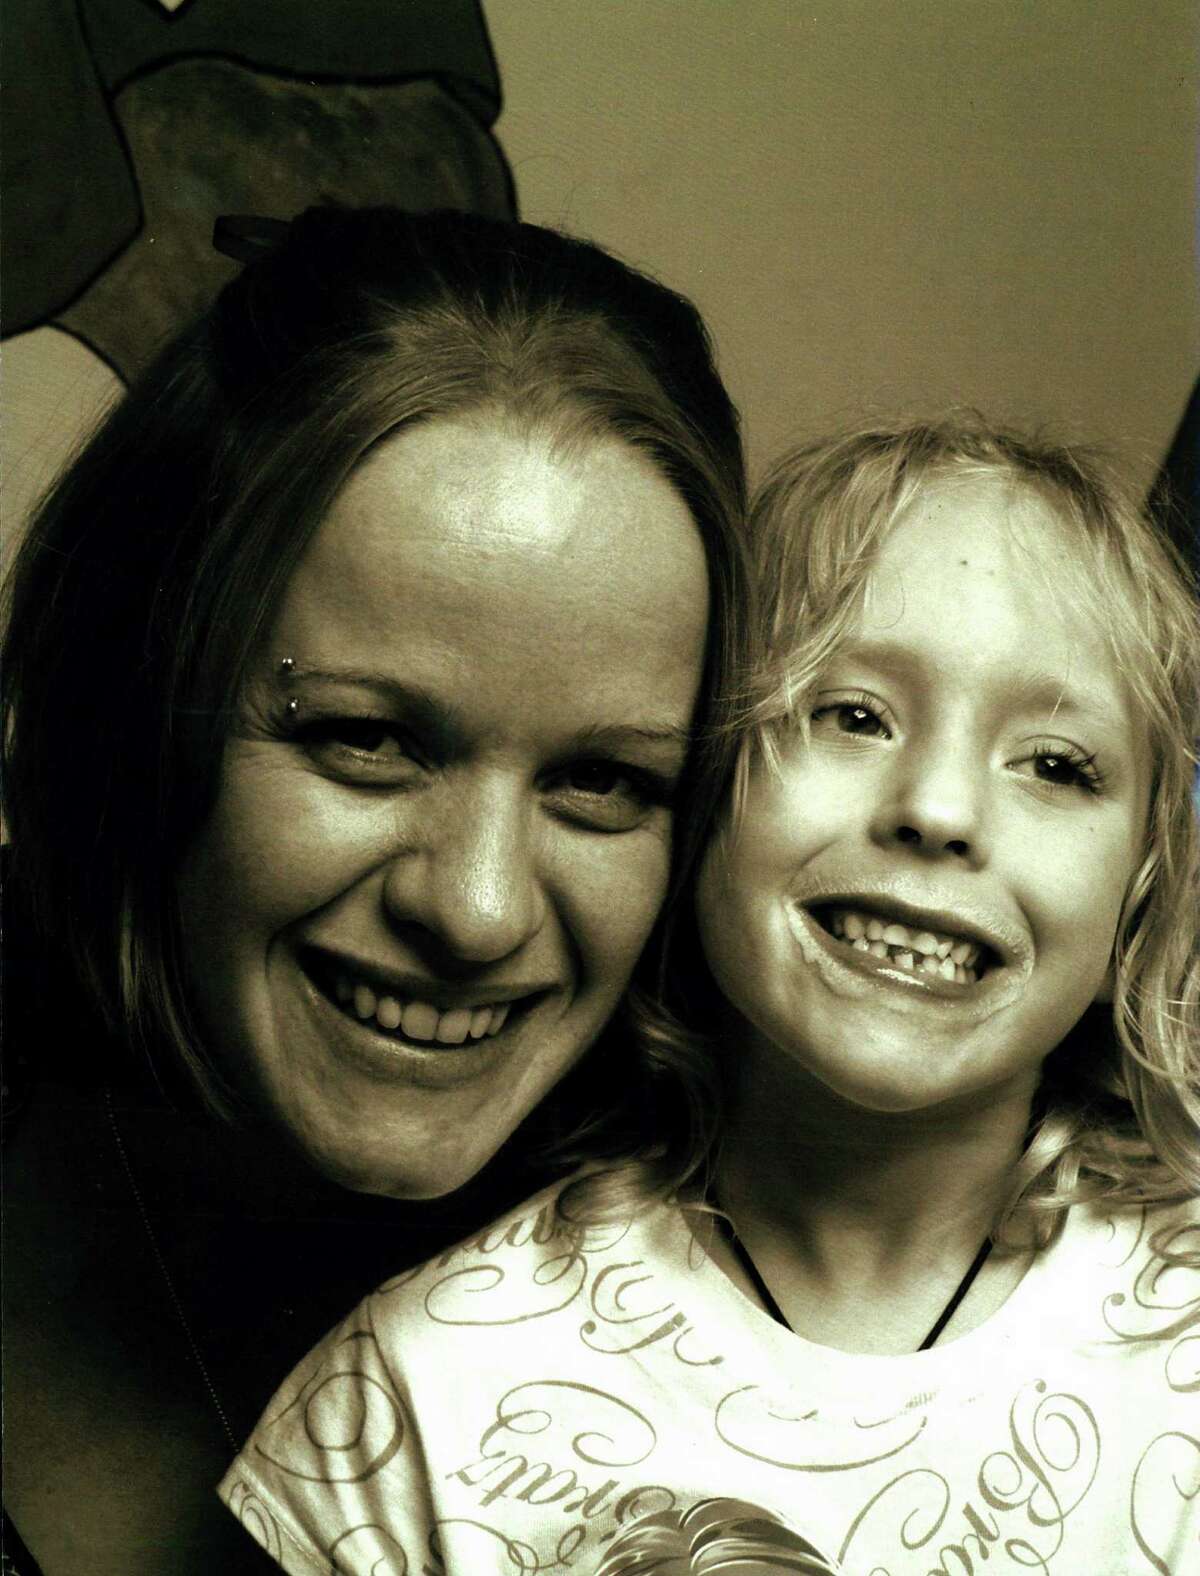 Jo-Anne Brasse (mother), now Jo-Anne Guerrero, and Sarah Brasse who died in February 2009 of untreated appendicitis at age 8.